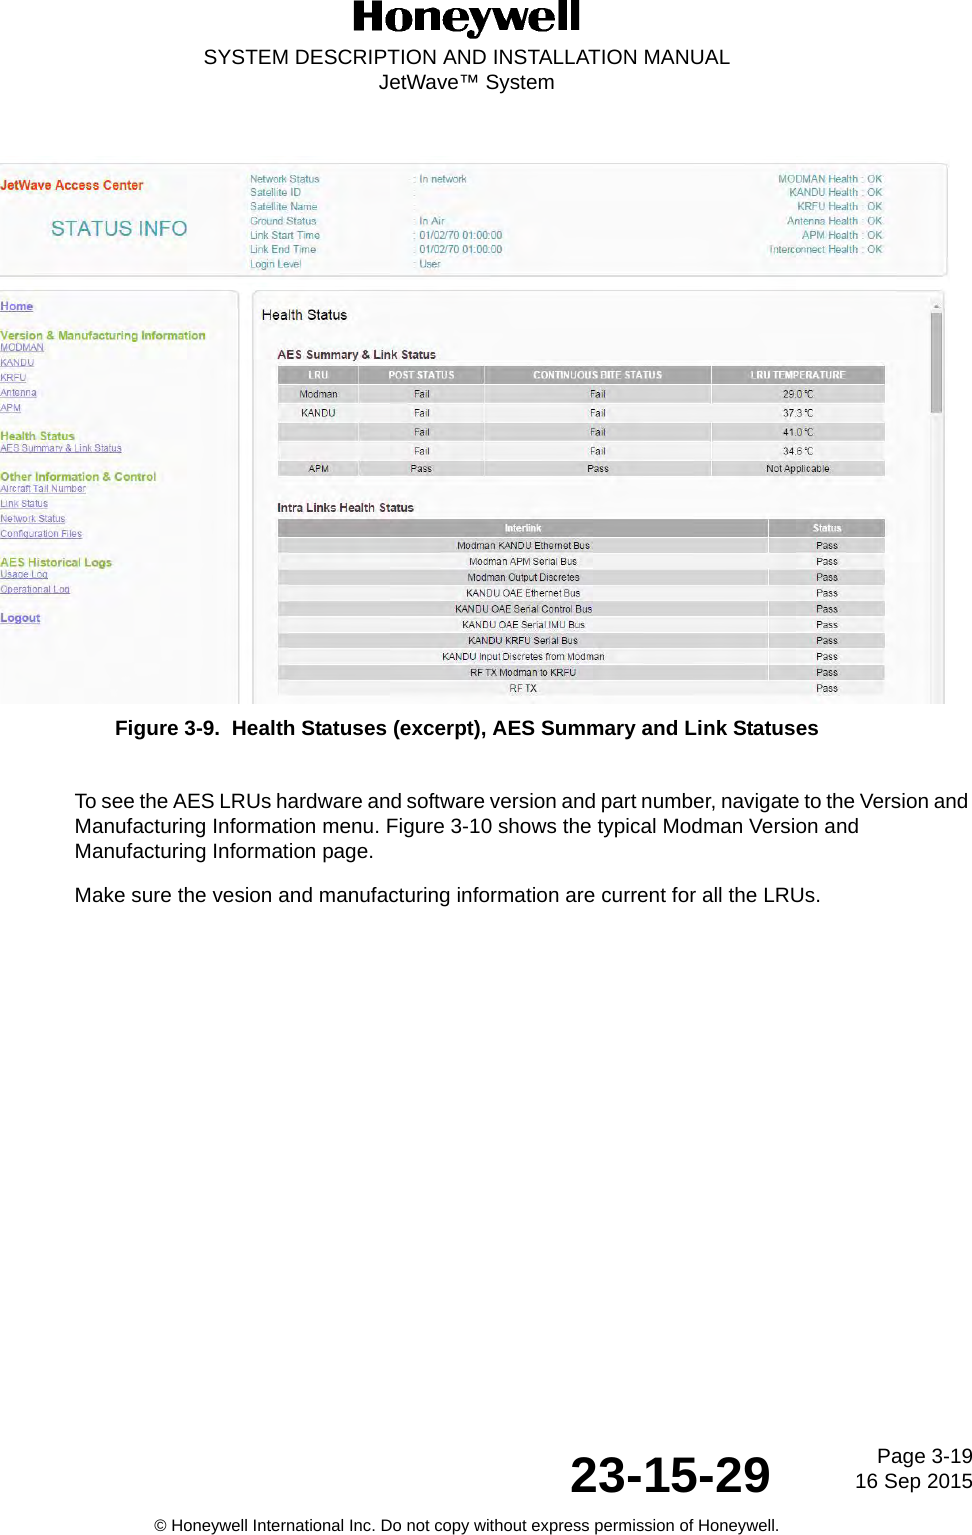 Page 3-1916 Sep 201523-15-29SYSTEM DESCRIPTION AND INSTALLATION MANUALJetWave™ System© Honeywell International Inc. Do not copy without express permission of Honeywell.Figure 3-9.  Health Statuses (excerpt), AES Summary and Link StatusesTo see the AES LRUs hardware and software version and part number, navigate to the Version and Manufacturing Information menu. Figure 3-10 shows the typical Modman Version and Manufacturing Information page.Make sure the vesion and manufacturing information are current for all the LRUs.